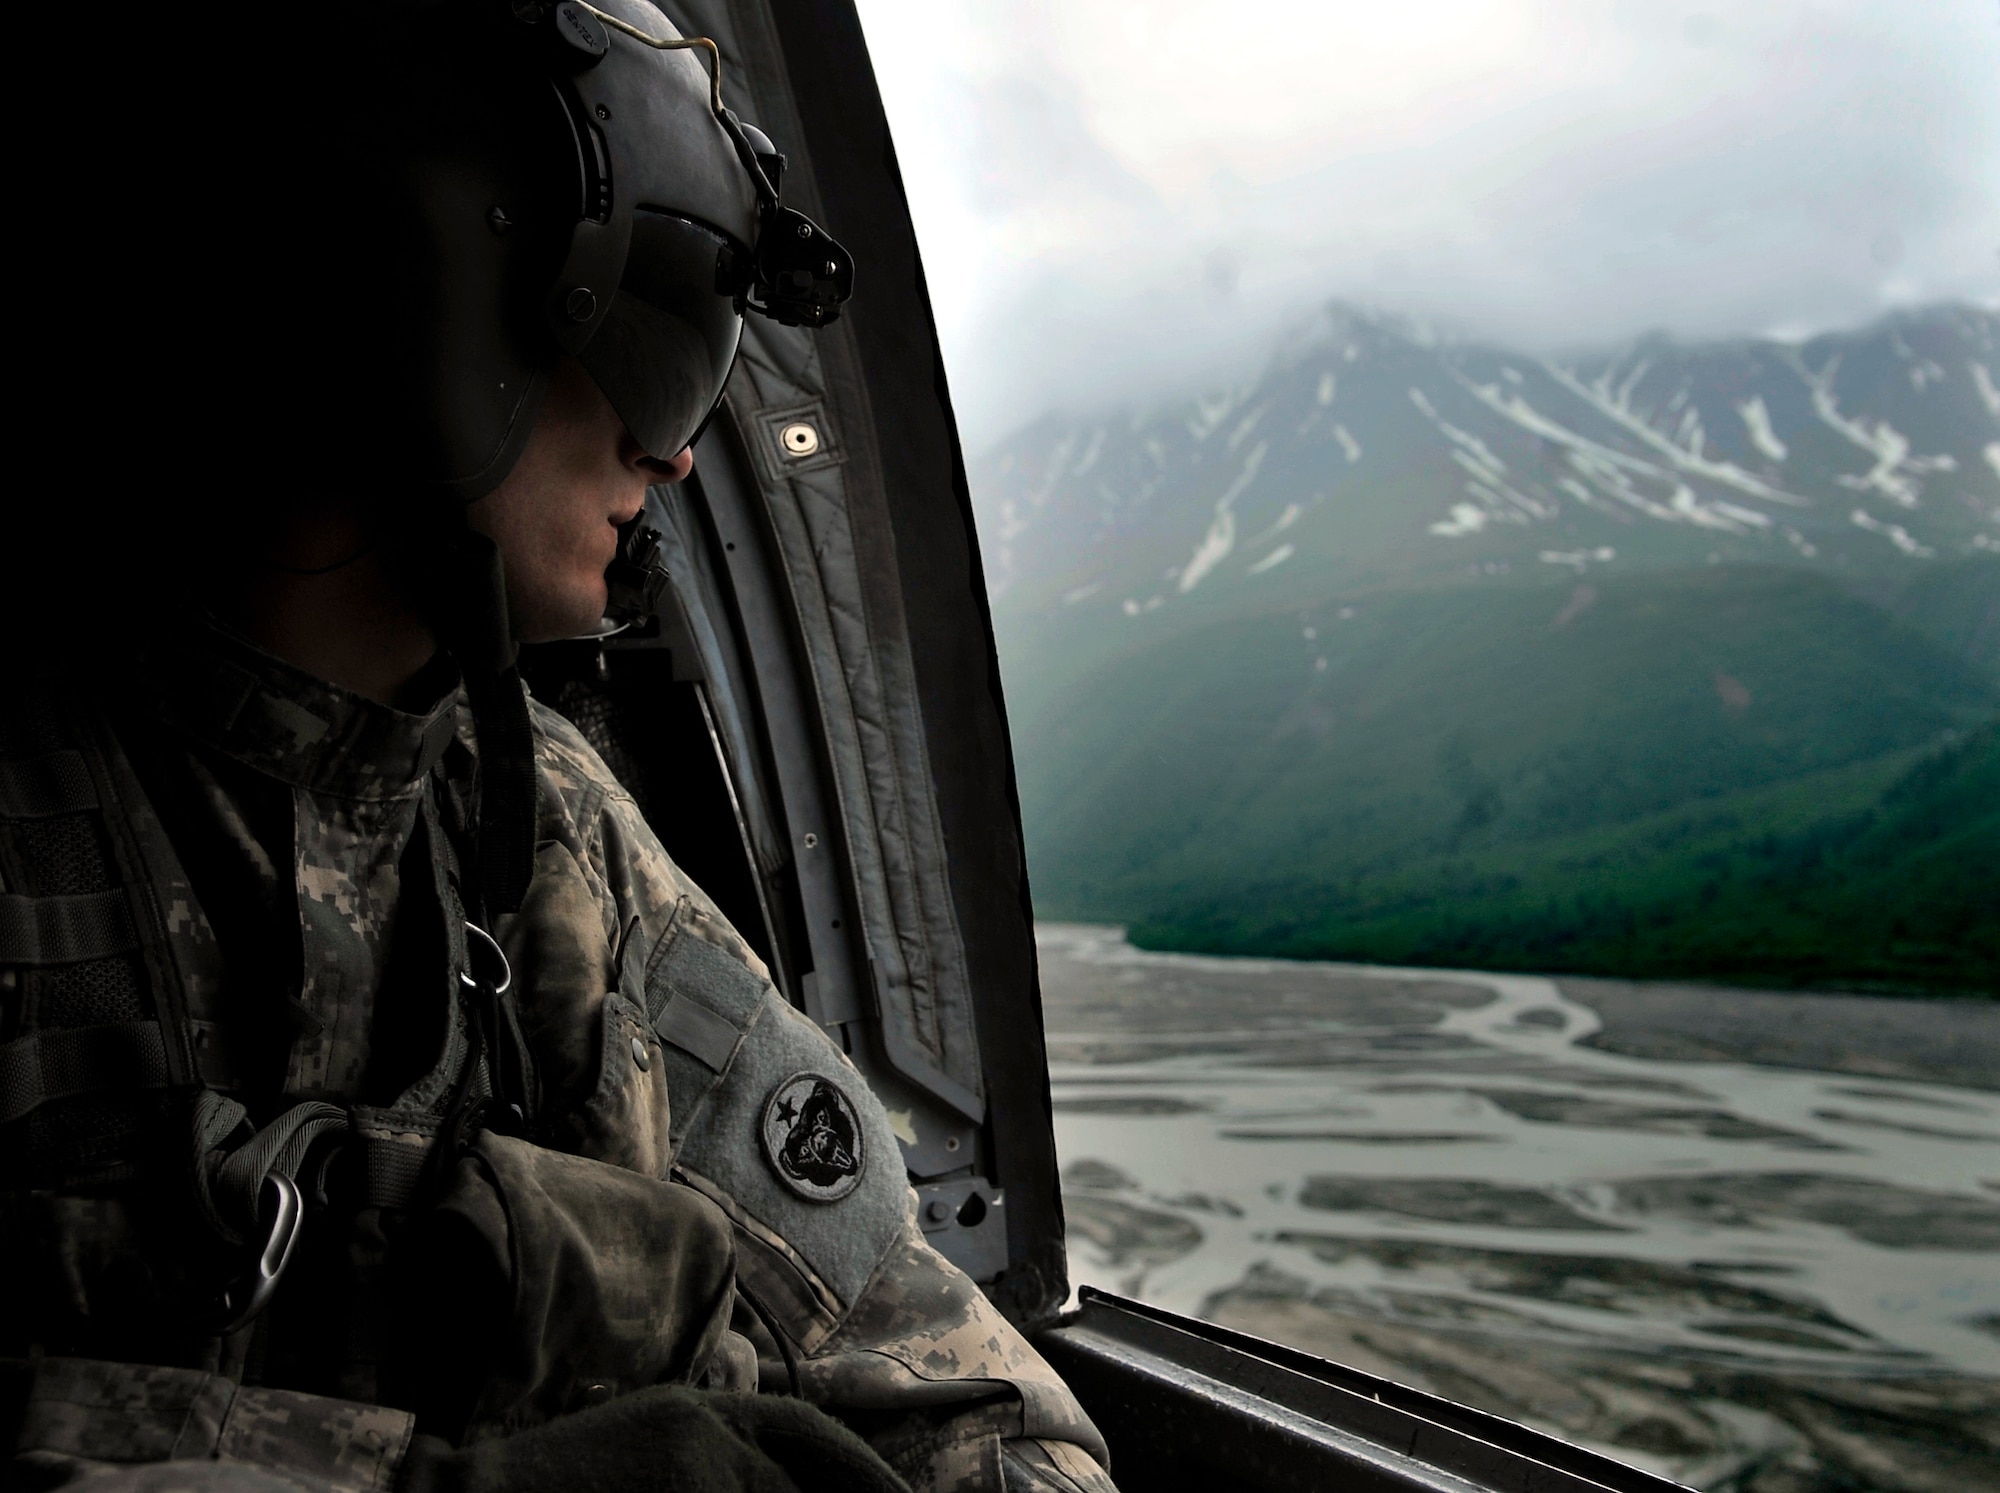 Army Sgt. William Penley looks over the Alaskan terrain in a CH-47 Chinook during NORTHERN EDGE 2009, June 17. NE09 is a large scale exercise hosted in Alaska to improve command, control and communications between the Armed Services. Sergeant Penley is a flight engineer assigned to Bravo Comany 152, Fort Wainwright, Alaska. (U.S. Air Force photo/Staff Sgt. Christopher Boitz)